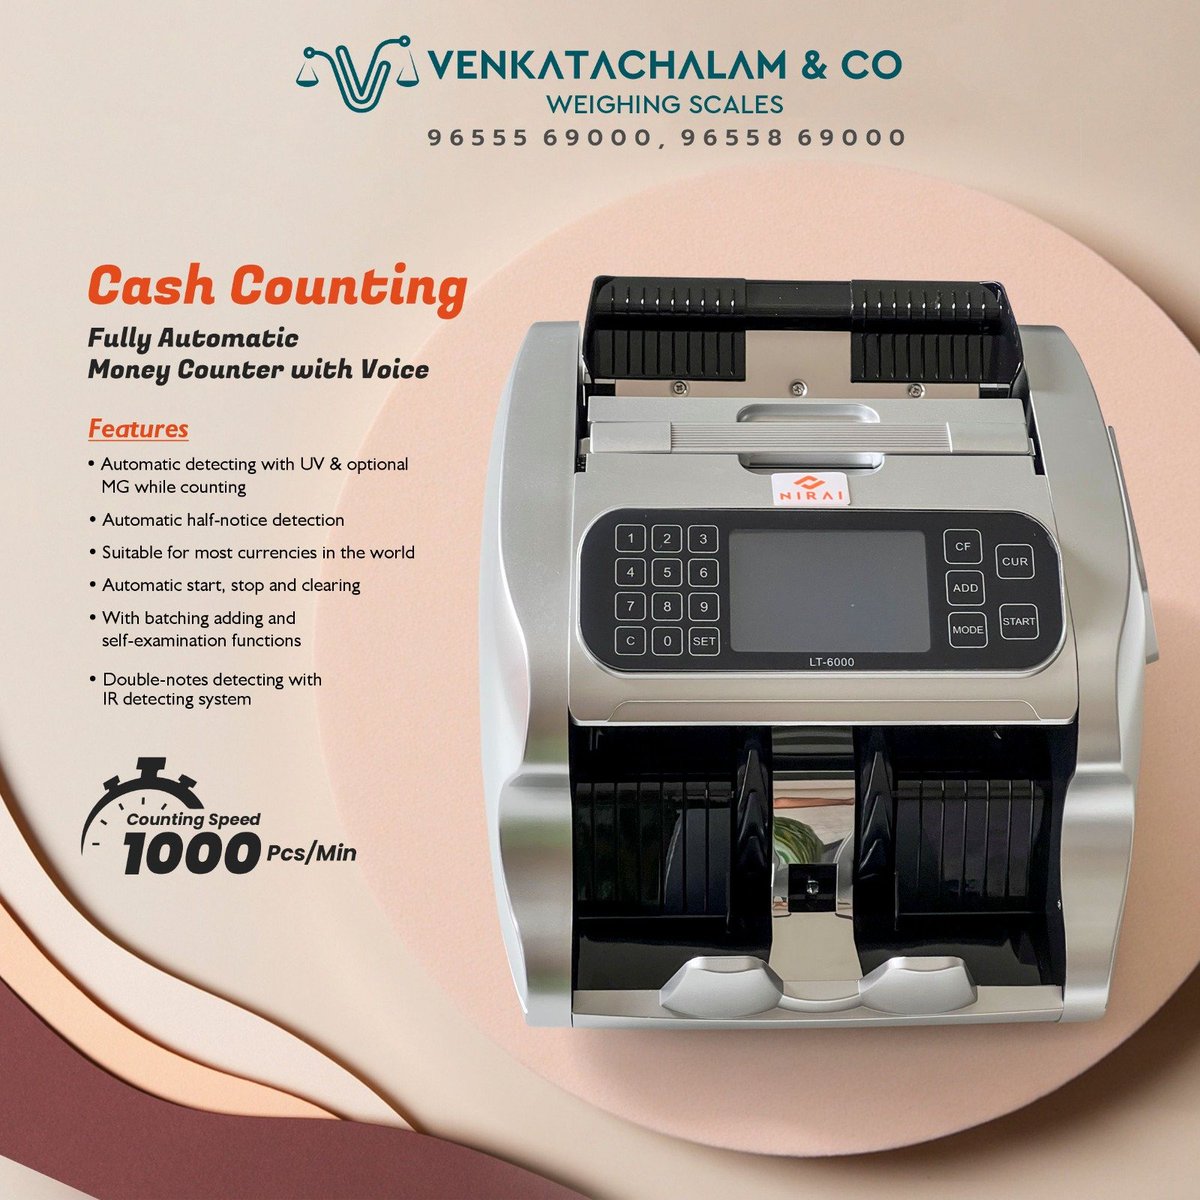 FULLY AUTOMATIC MONEY COUNTER WITH VOICE : suitable for most currencies in the world.

Counting Speed :1000 Pcs/Min
#venkatachalam #prrestigescale #coimbatore #venkatachalamandco #cashcountingmachine #digitalscales #banks #pawnshops #jewelleryshop #cashcounter #nirai